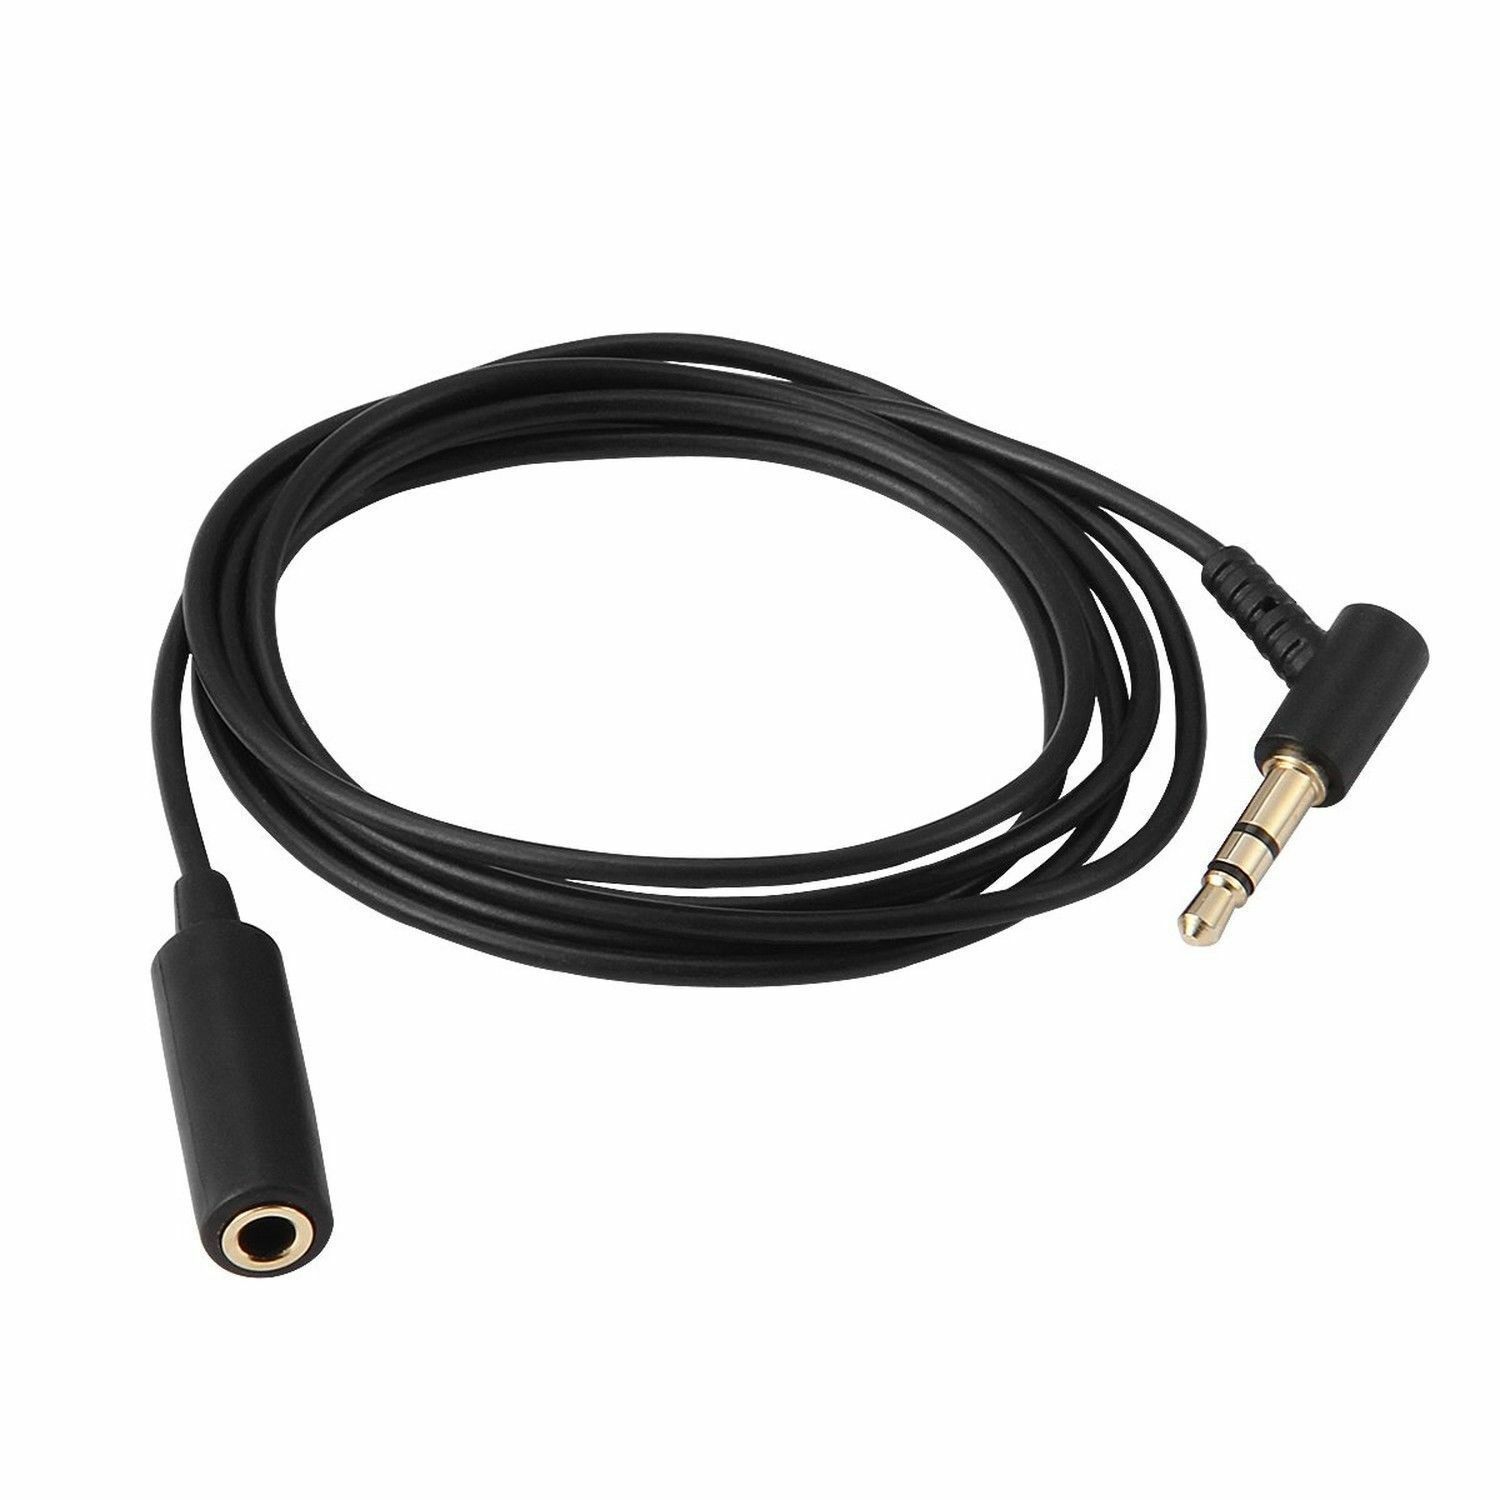 Replacement Headphones Audio Extension Cable Cord For  QC3 QC15 IE OE AE 40" - $7.72